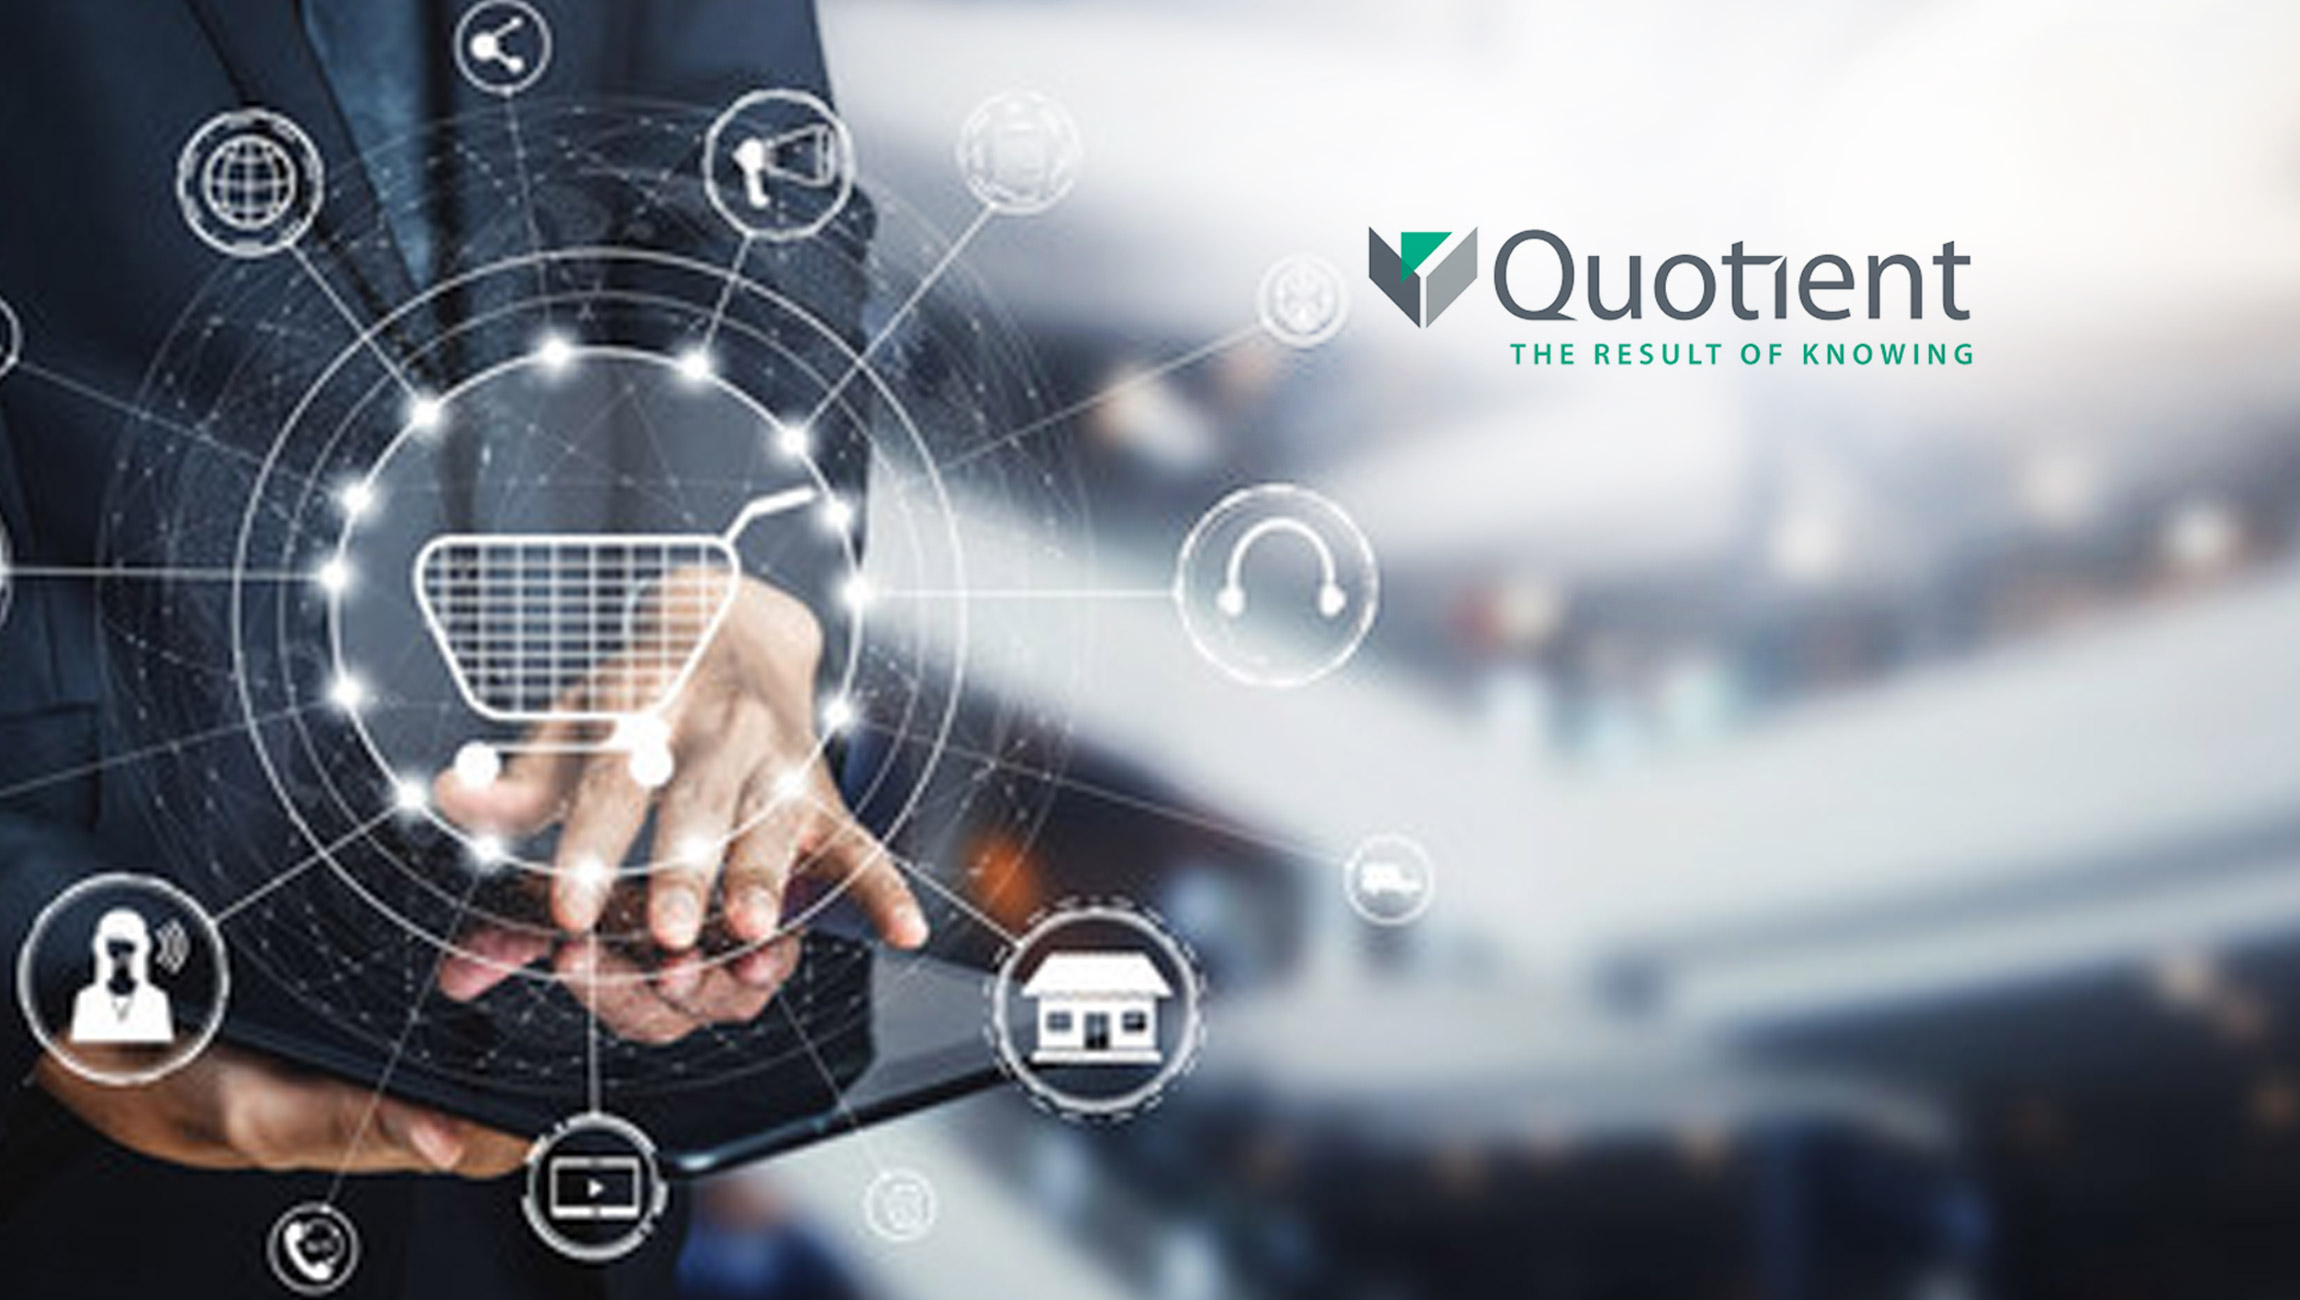 Quotient and Place Exchange Offer First-Time Programmatic Access to InStore Audio Network in Over 16,000 Stores